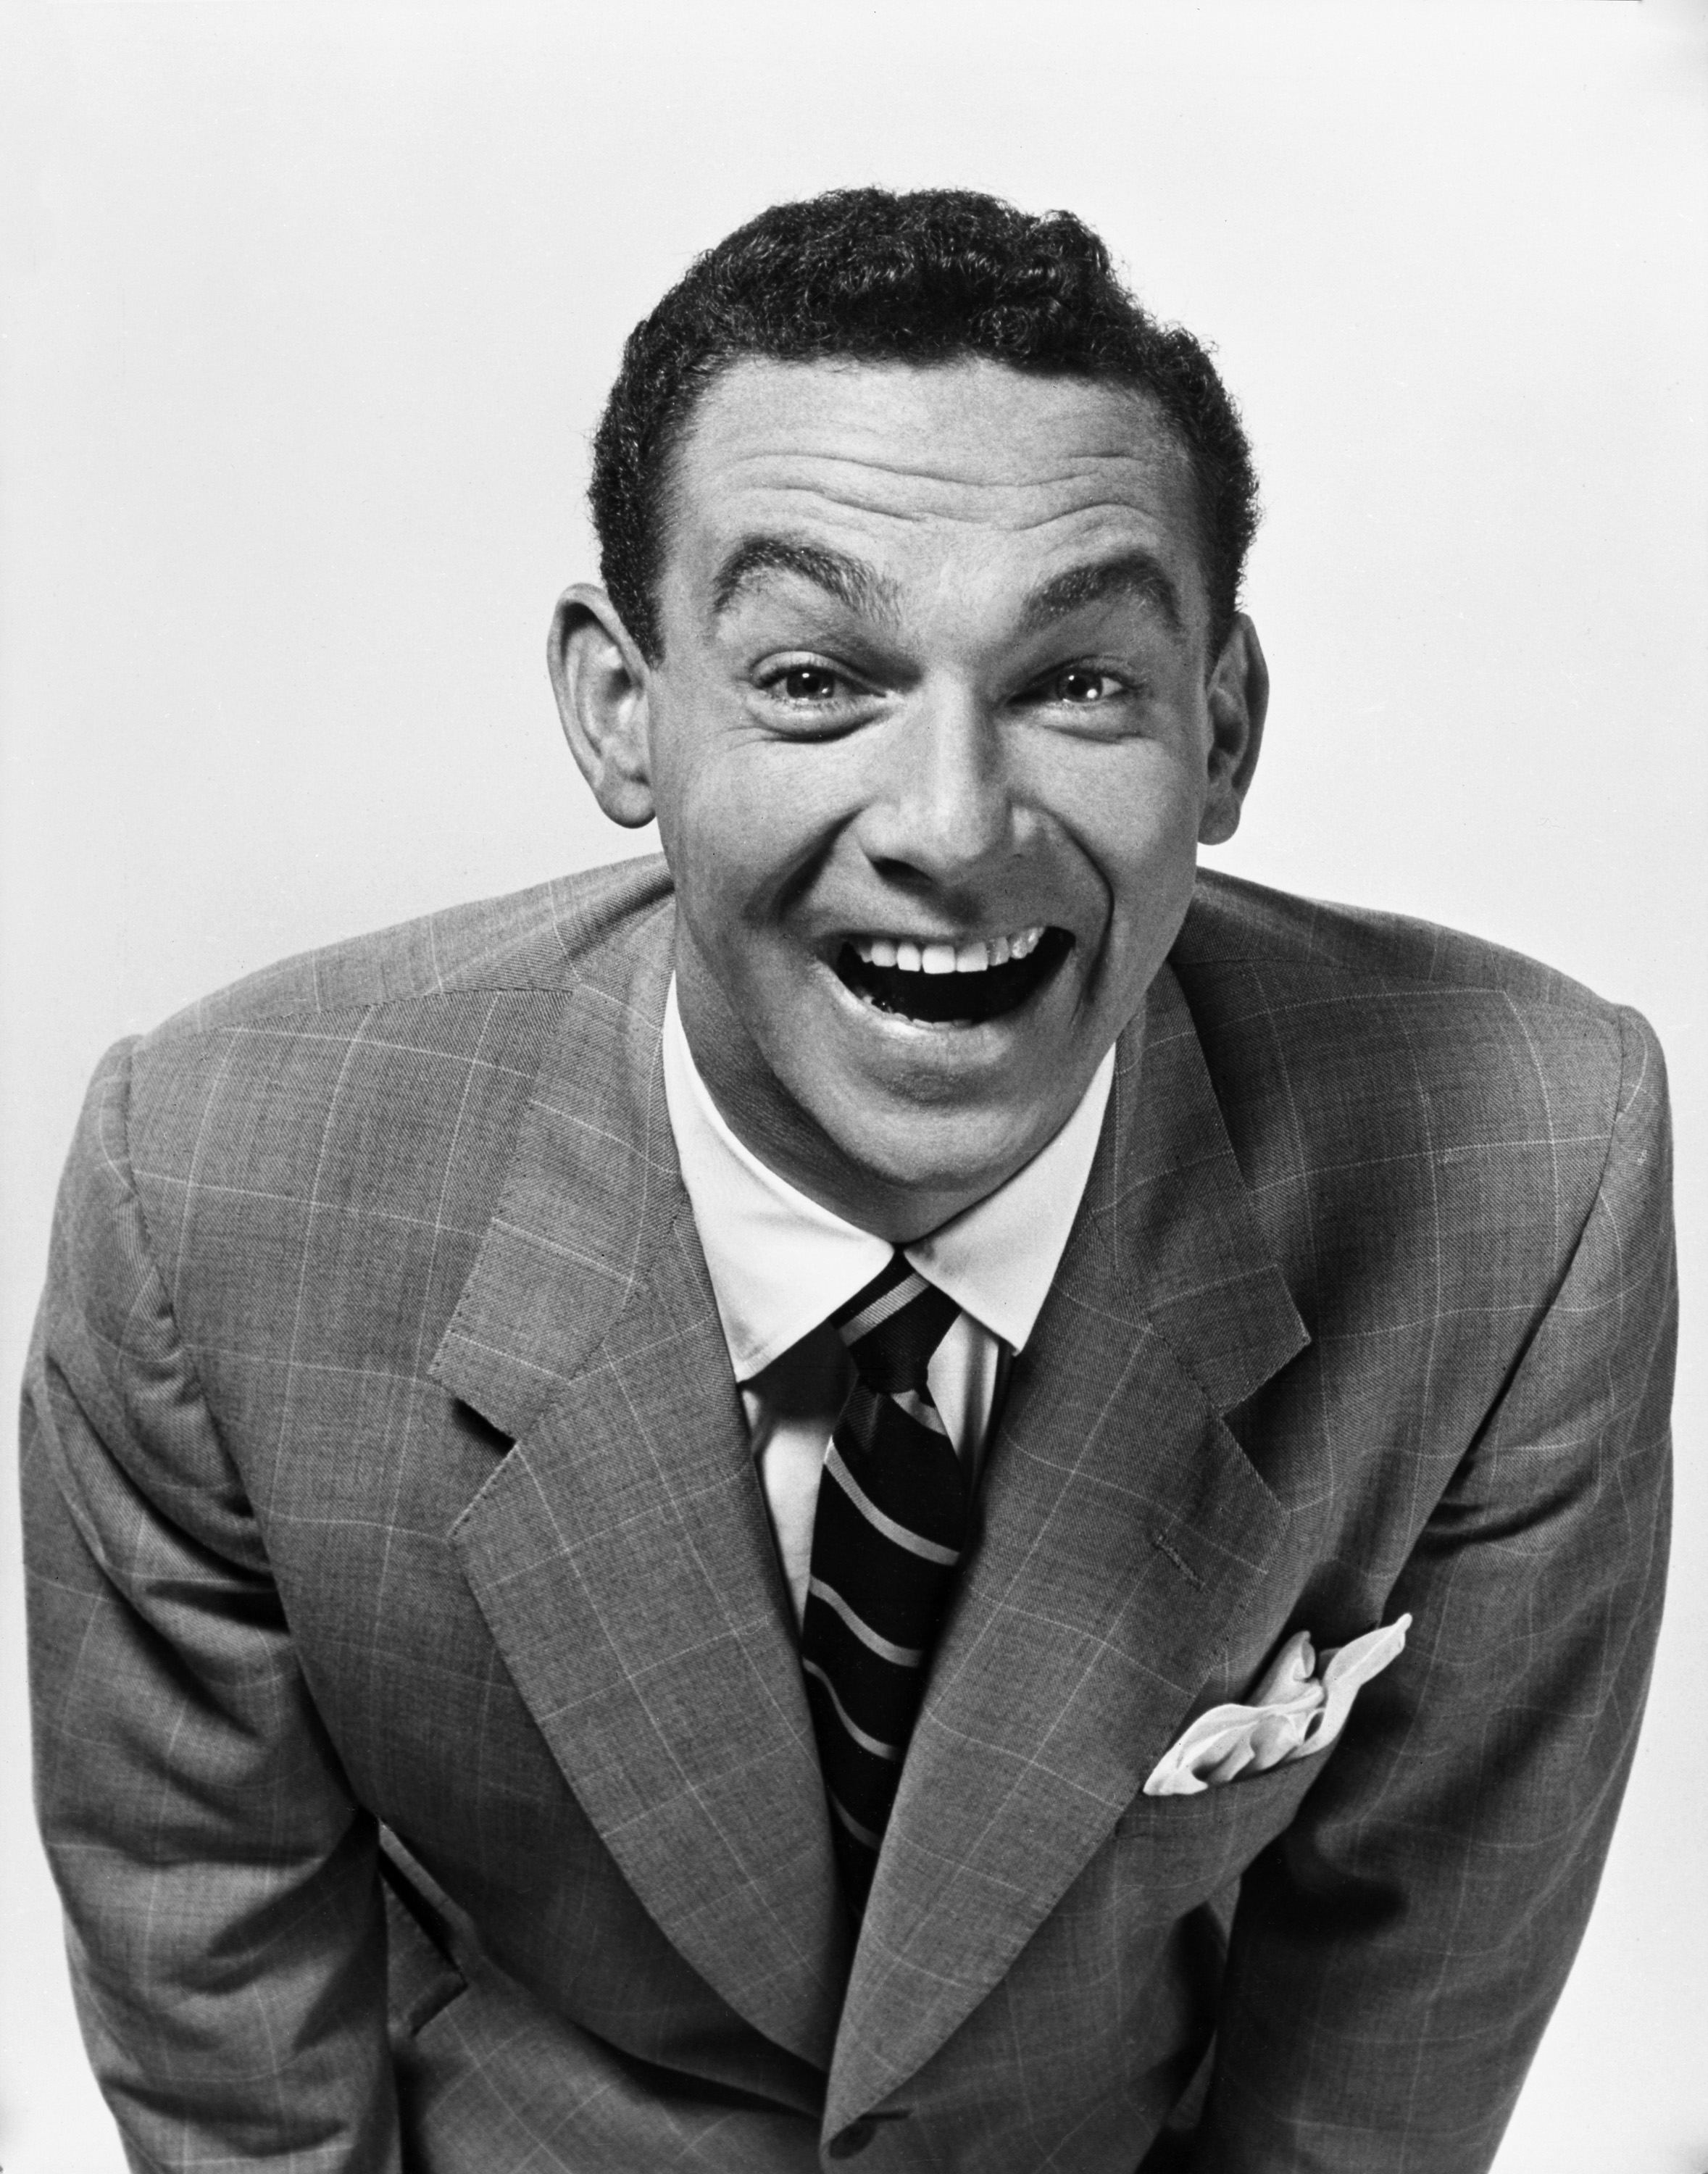 Actor/comedian Jack Carter in 1951. (NBC/NBCU Photo Bank/Getty Images)